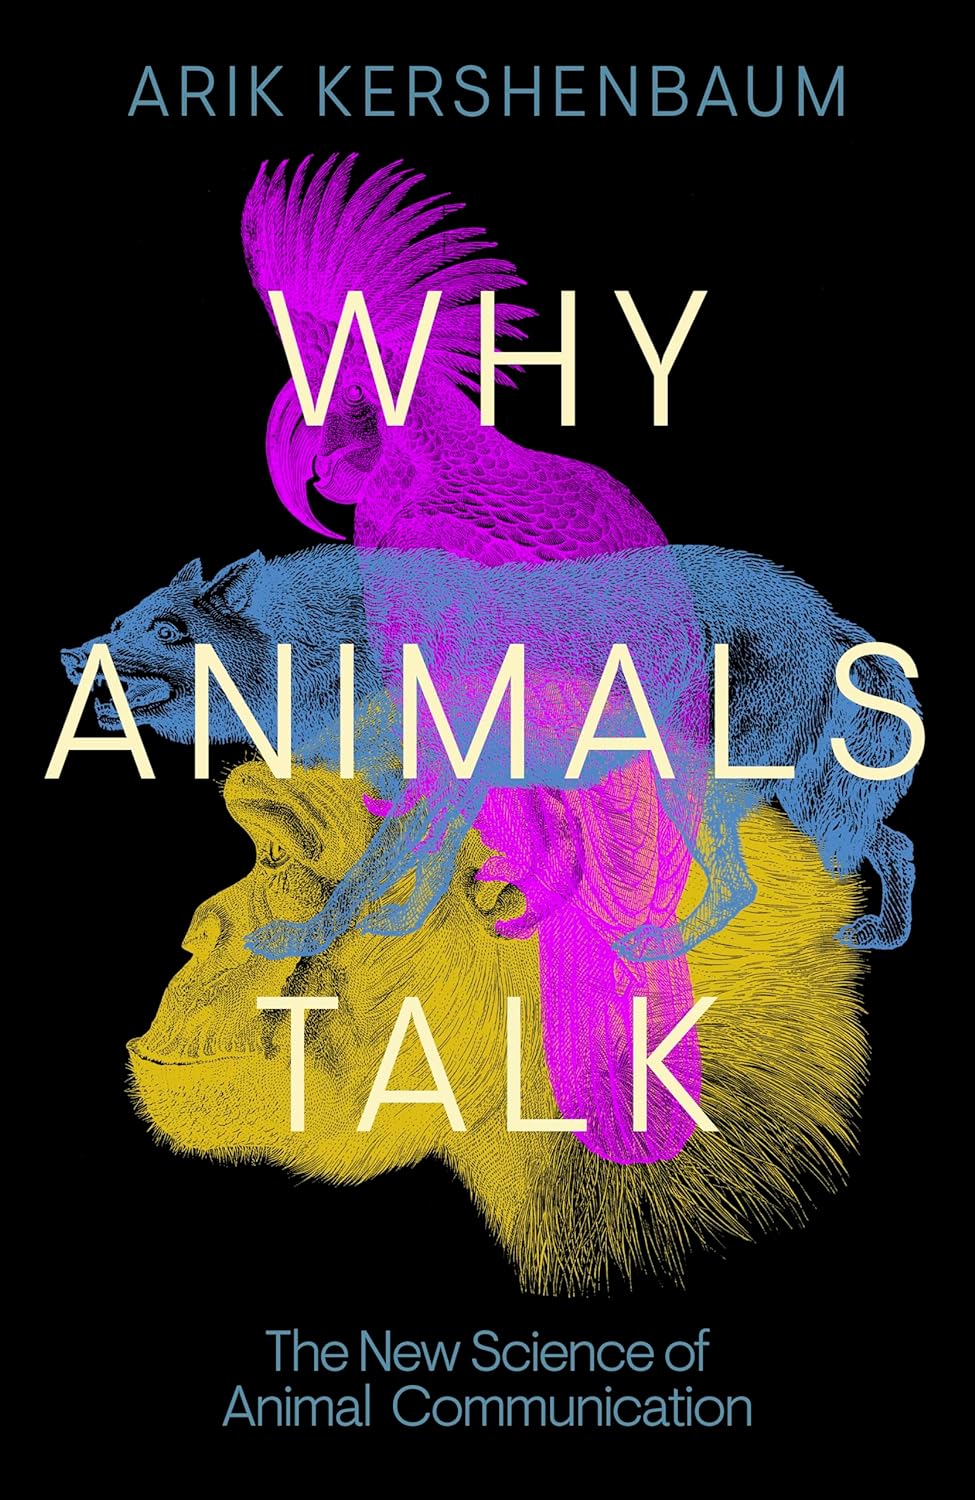 Why Animals Talk: The New Science of Animal Communication